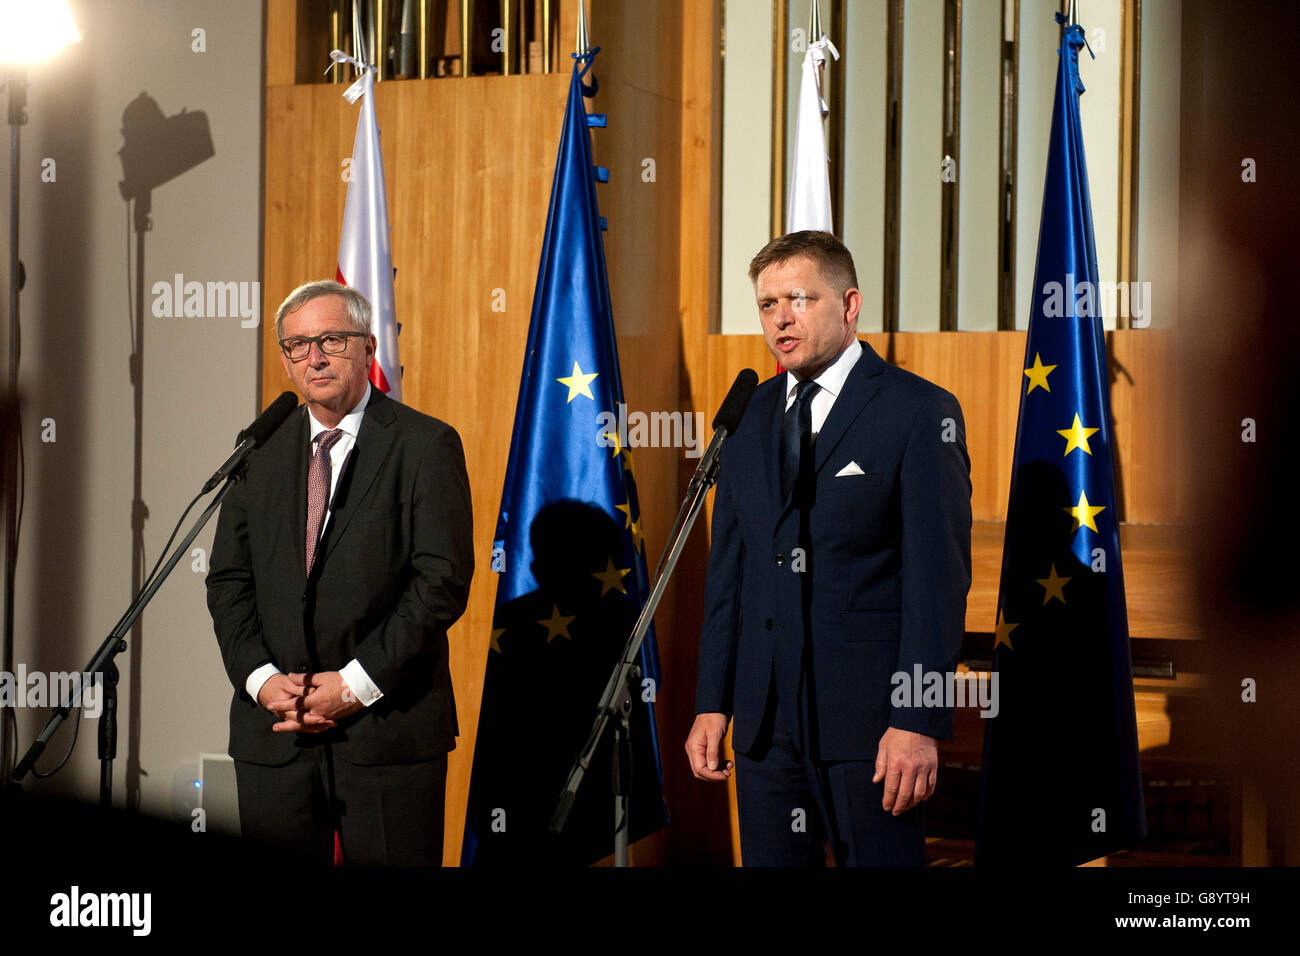 Slovakia's forthcoming EU presidency will be successful, President of the European Commission Jean-Claude Juncker, left, now on a visit to the country, said today, on Thursday, June 30, 2016. As of Friday, Slovakia will hold the EU presidency for the next six months. Prime Minister Robert Fico, right, said Slovakia wanted to focus on positive topics and to bring the European agenda closer to the public. Slovakia is taking up the EU presidency in the shadow of the outcome of the British referendum that has started a debate about the future form of the EU. (CTK Photo/Martin Mikuta) Stock Photo